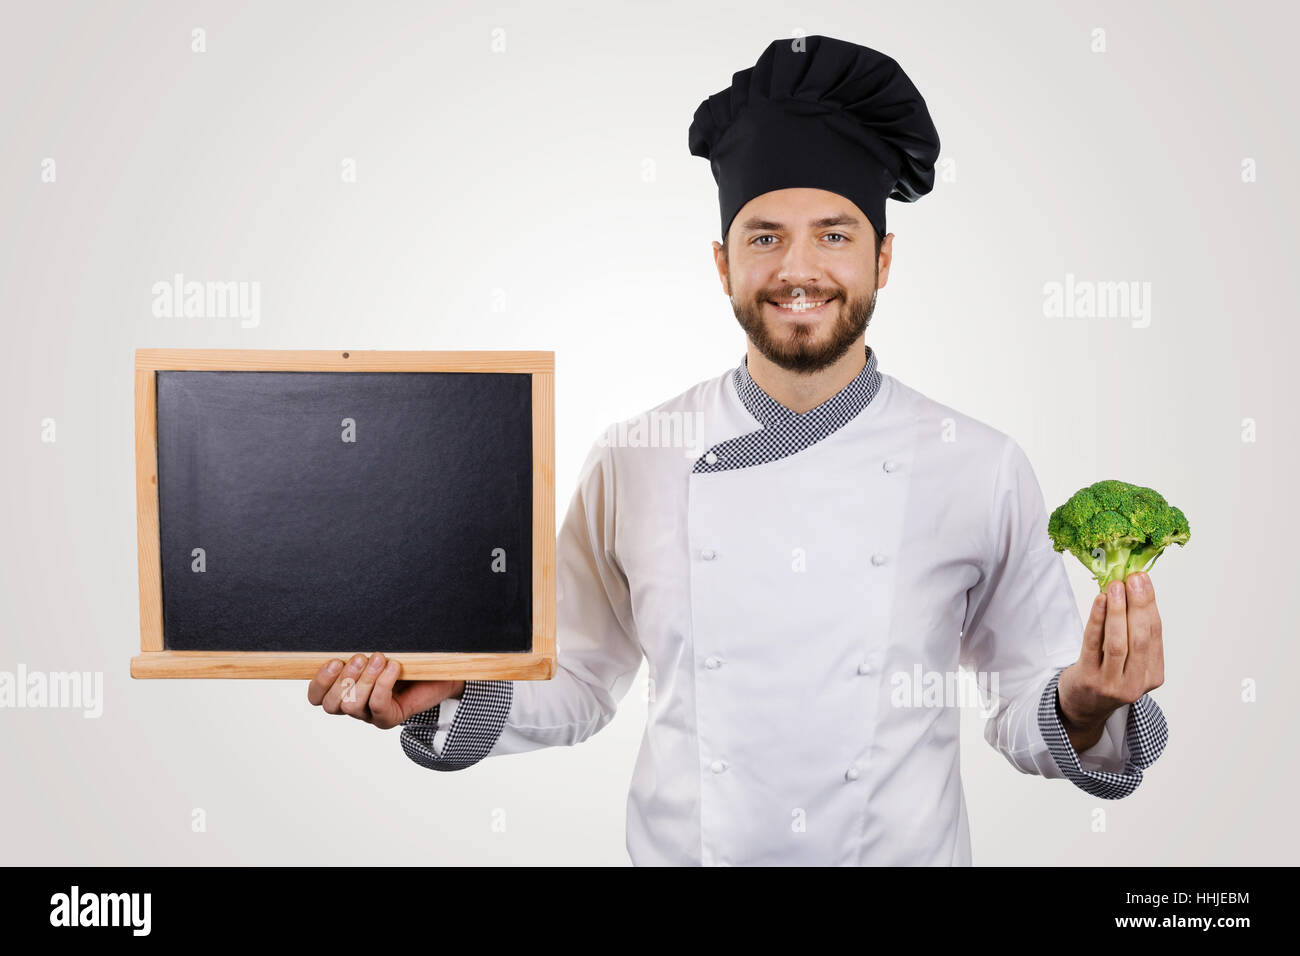 smiling young chef with blank blackboard and broccoli in hand Stock Photo